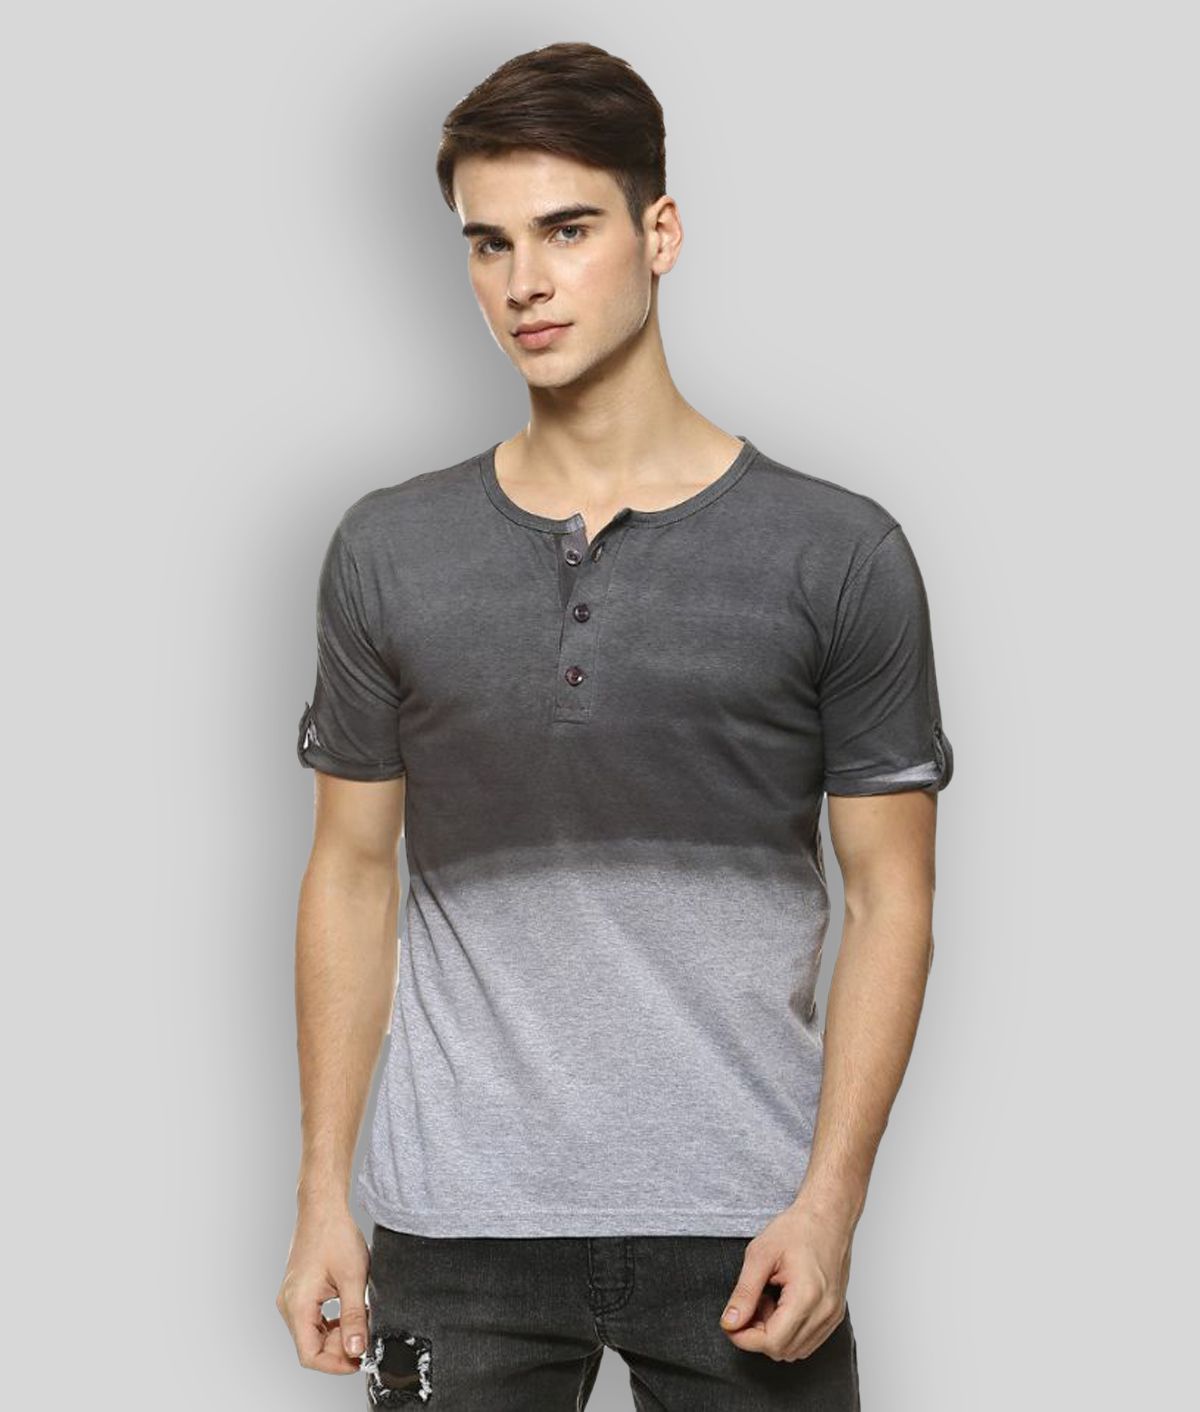     			Campus Sutra - Grey Cotton Regular Fit  Men's T-Shirt ( Pack of 1 )